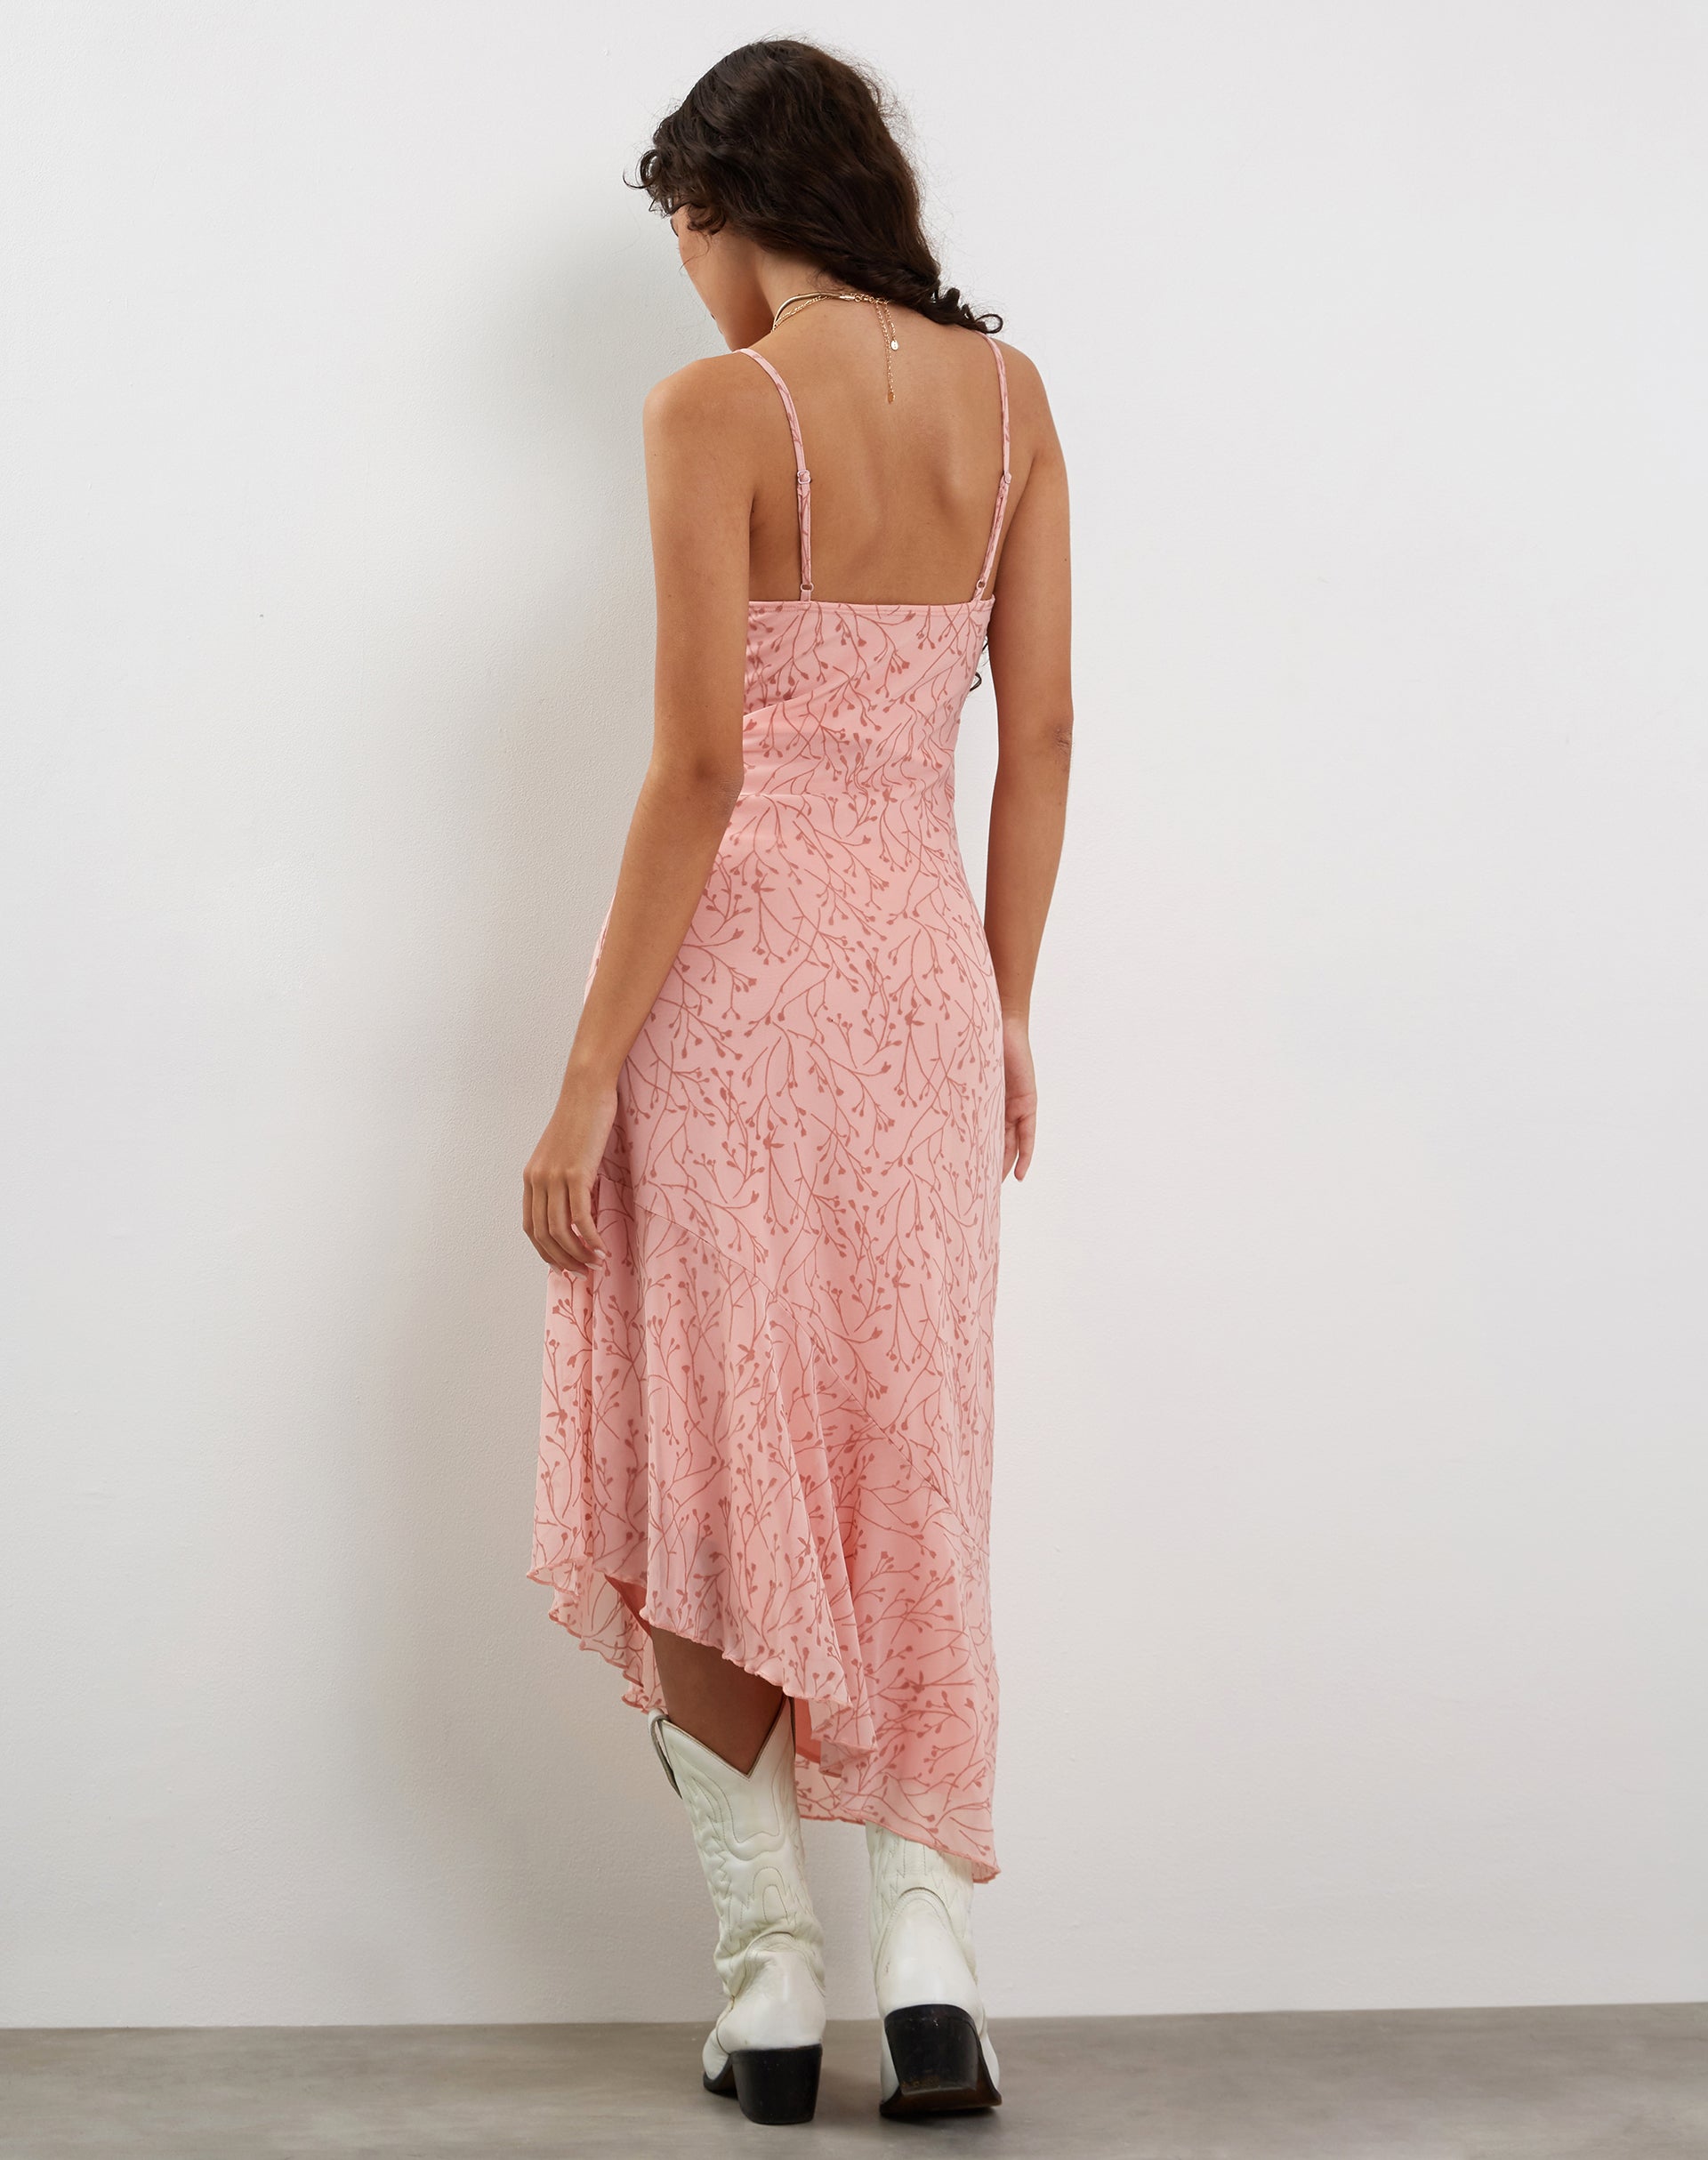 Image of Kavala Asymmetric Midi Dress in Shadow Floral Pink